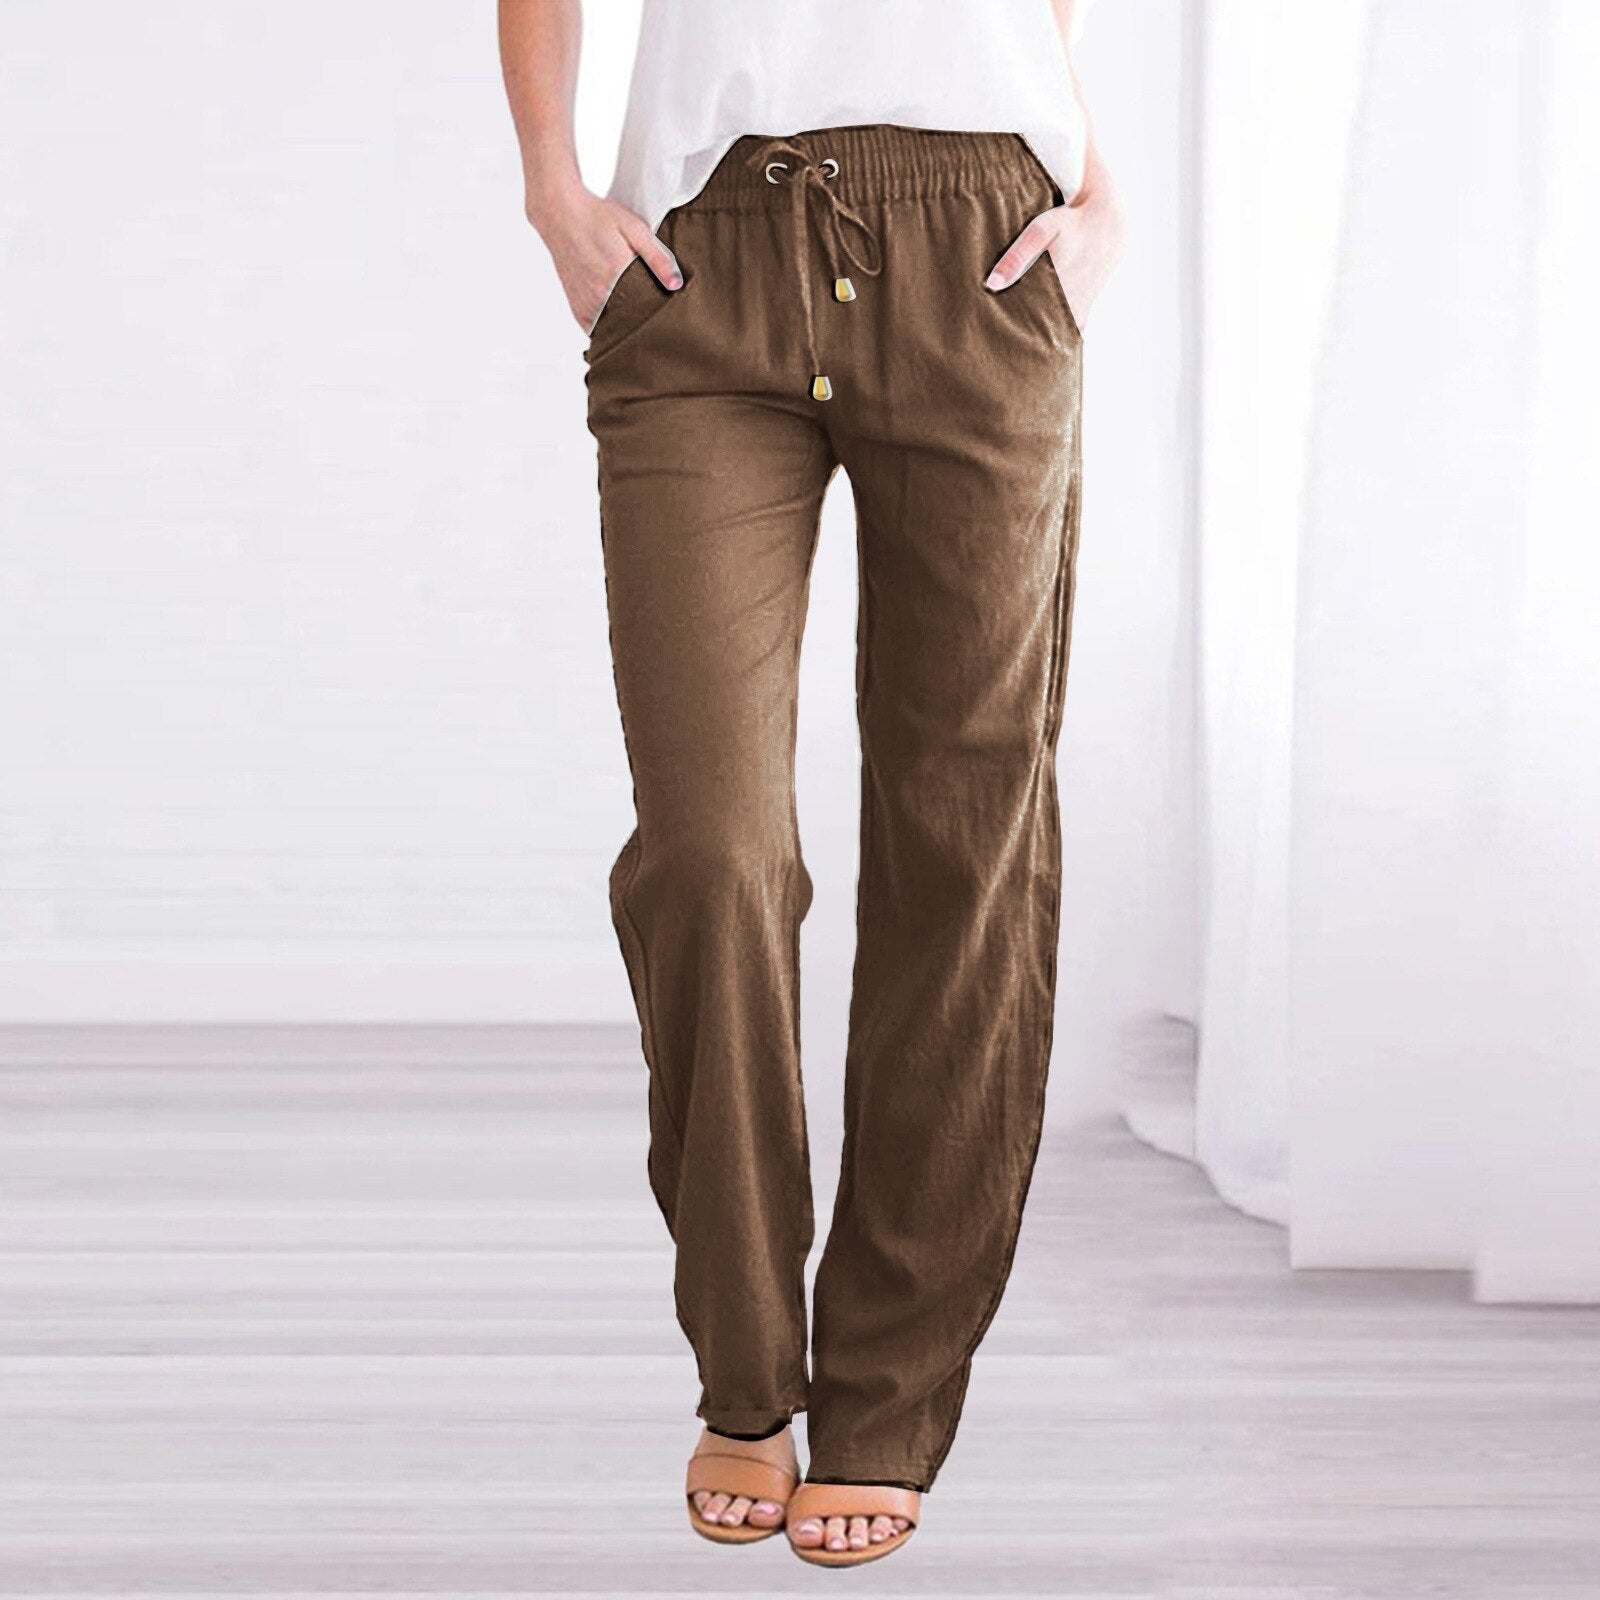 Casual Summer Pants for Women, Timeless Fashion